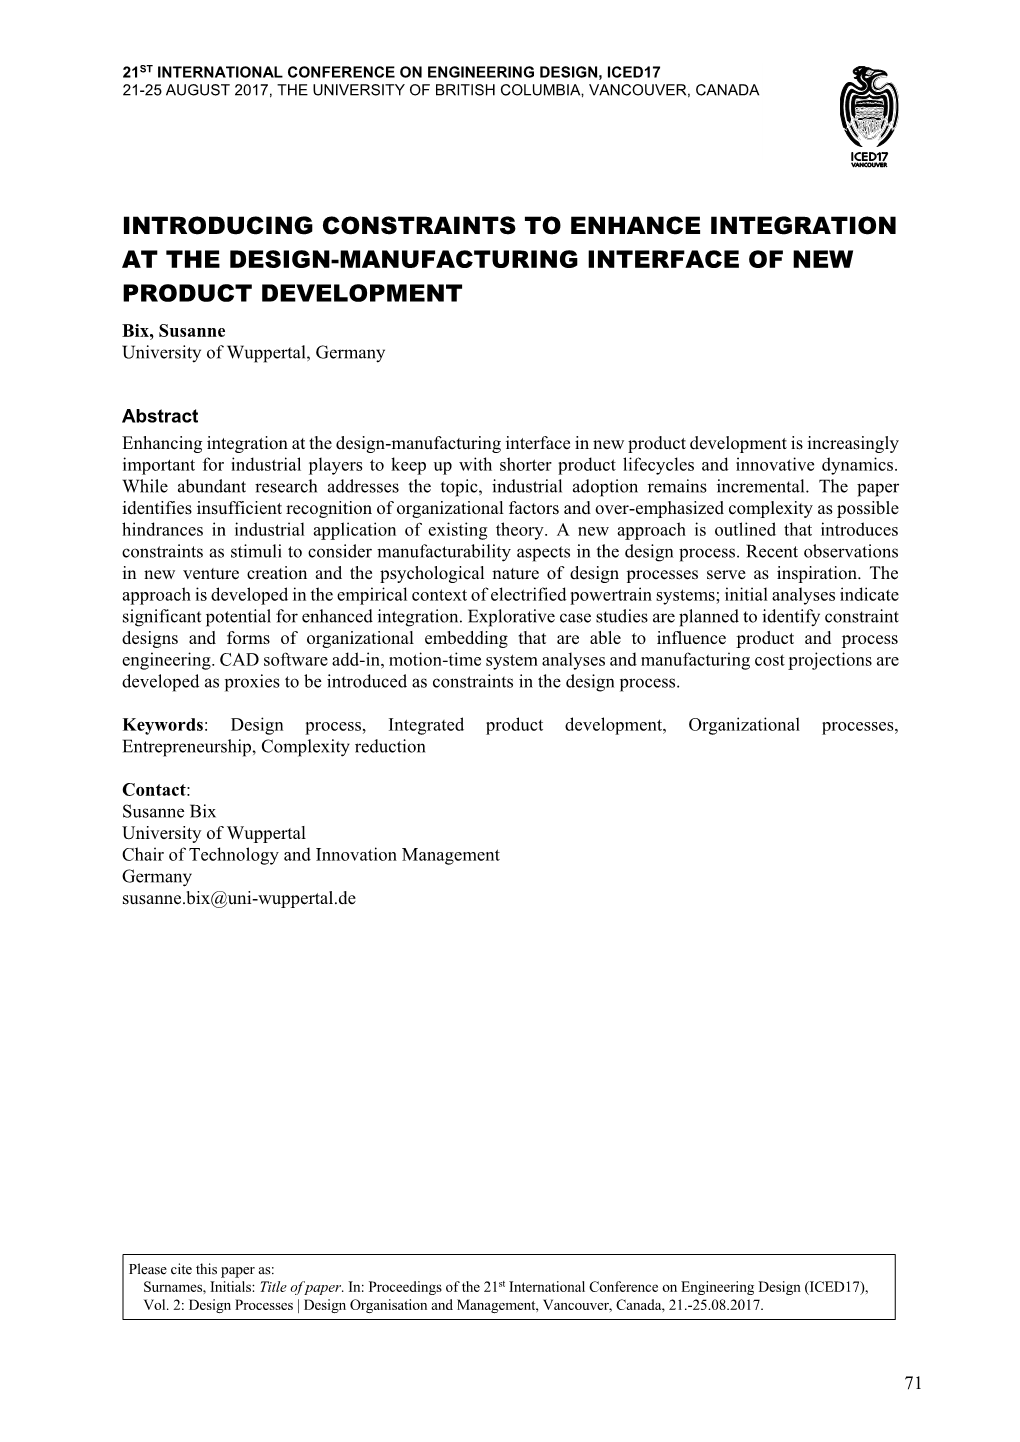 INTRODUCING CONSTRAINTS to ENHANCE INTEGRATION at the DESIGN-MANUFACTURING INTERFACE of NEW PRODUCT DEVELOPMENT Bix, Susanne University of Wuppertal, Germany